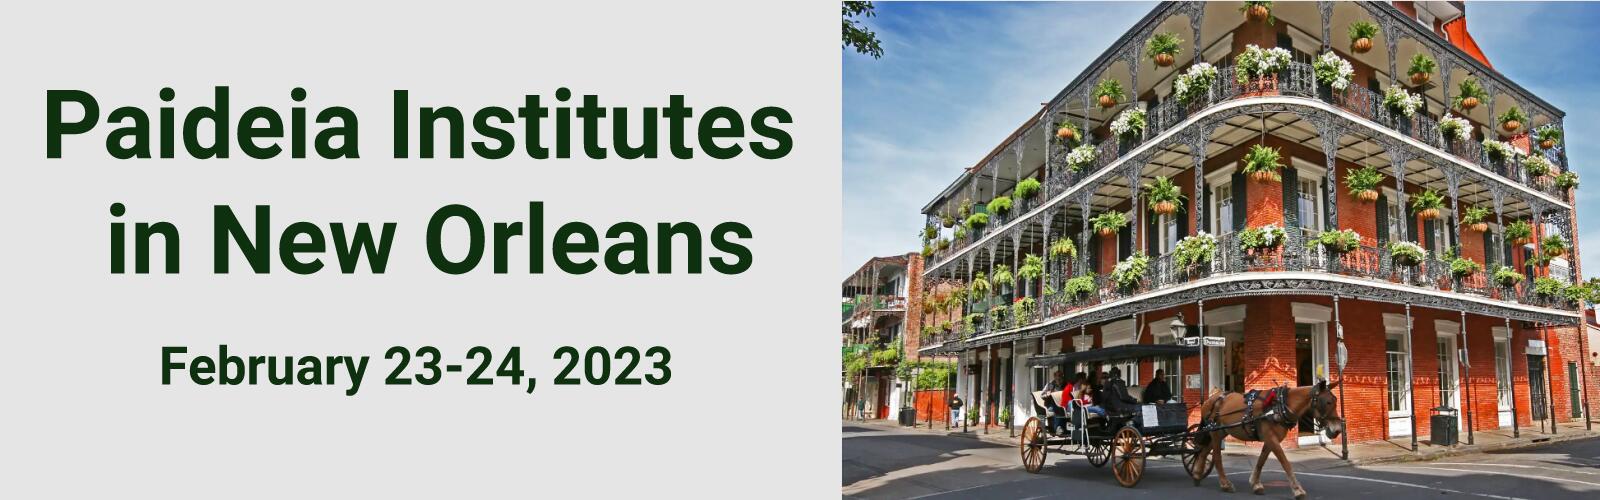 2023 Paideia Institutes in New Orleans